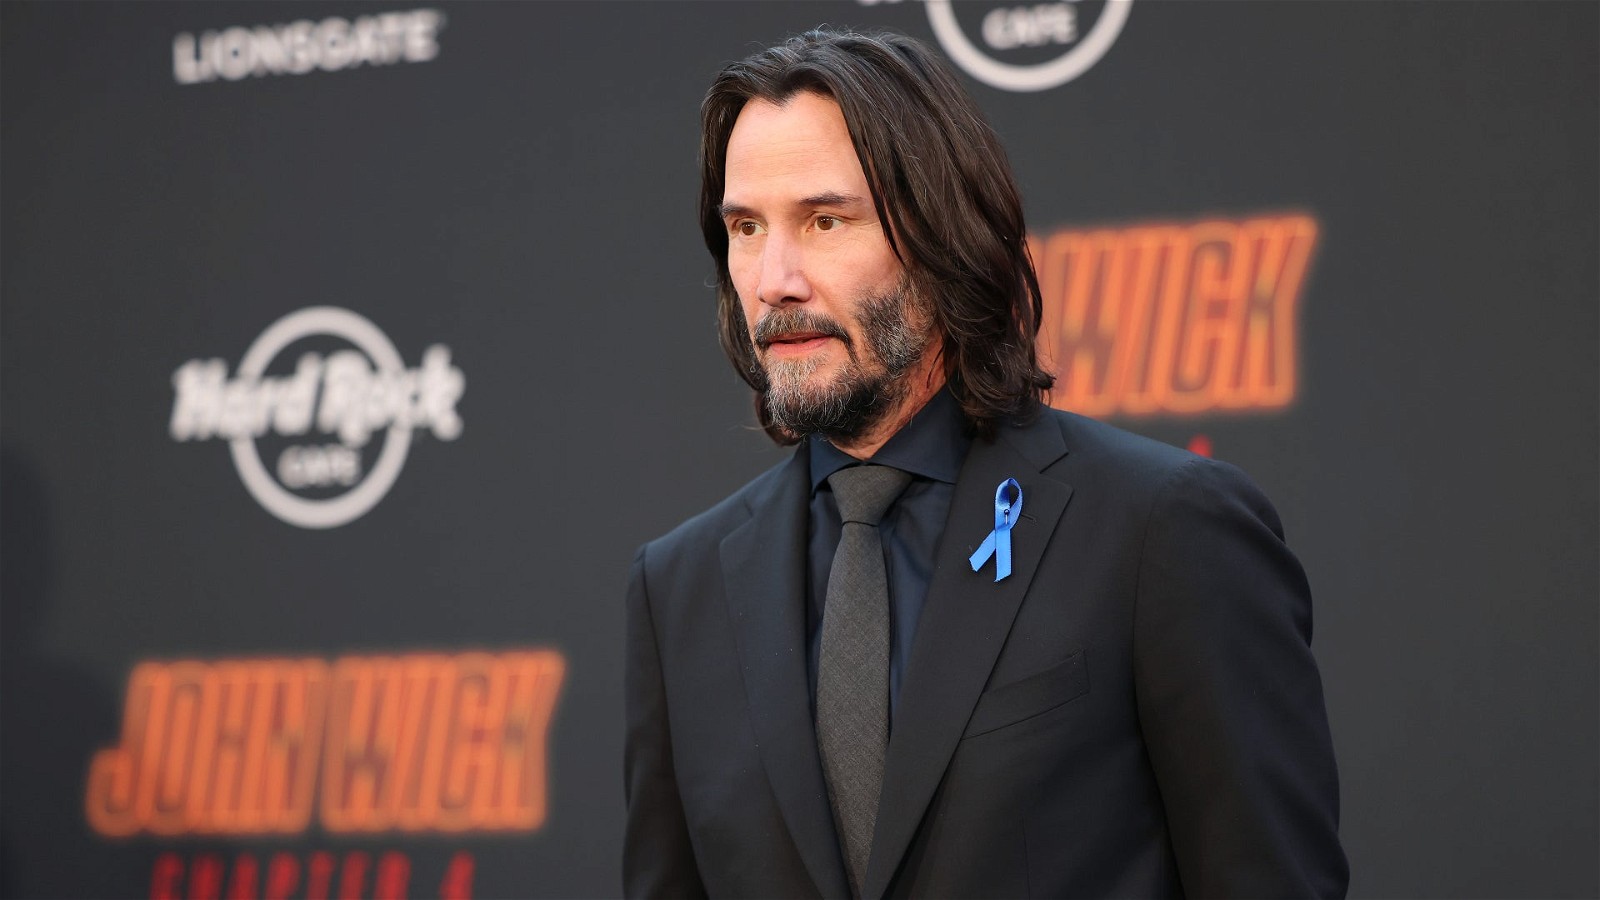 Keanu reeves at an event